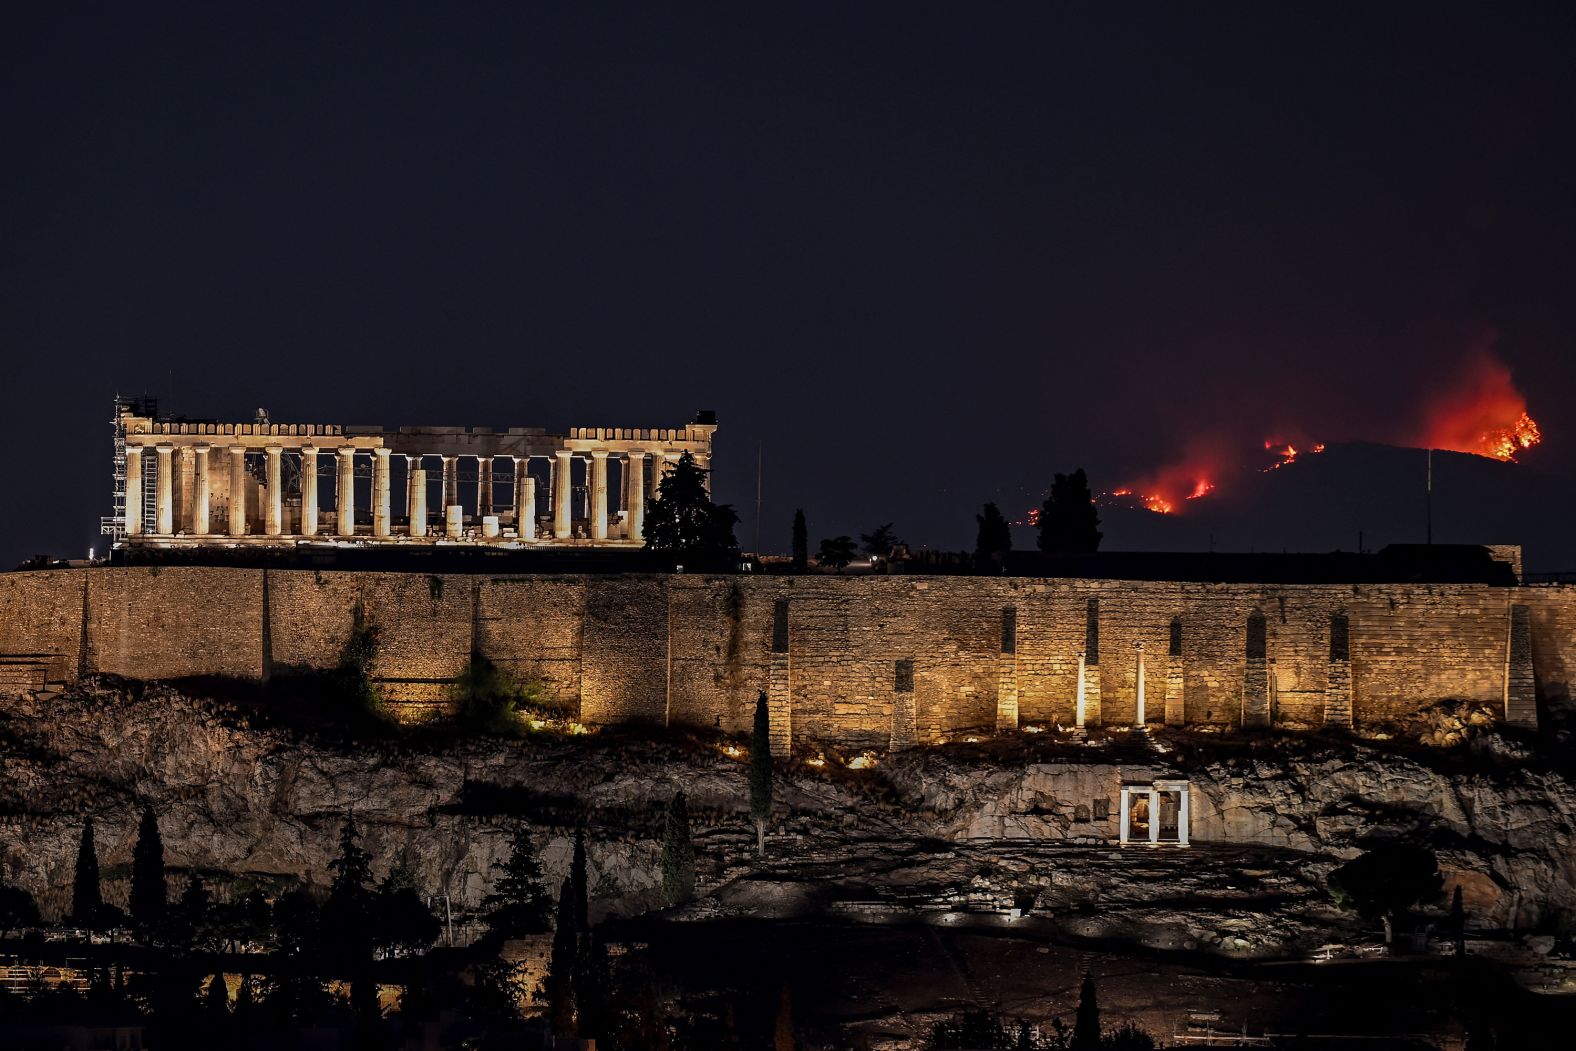 A forest burns behind the Parthenon in Athens on August 22.